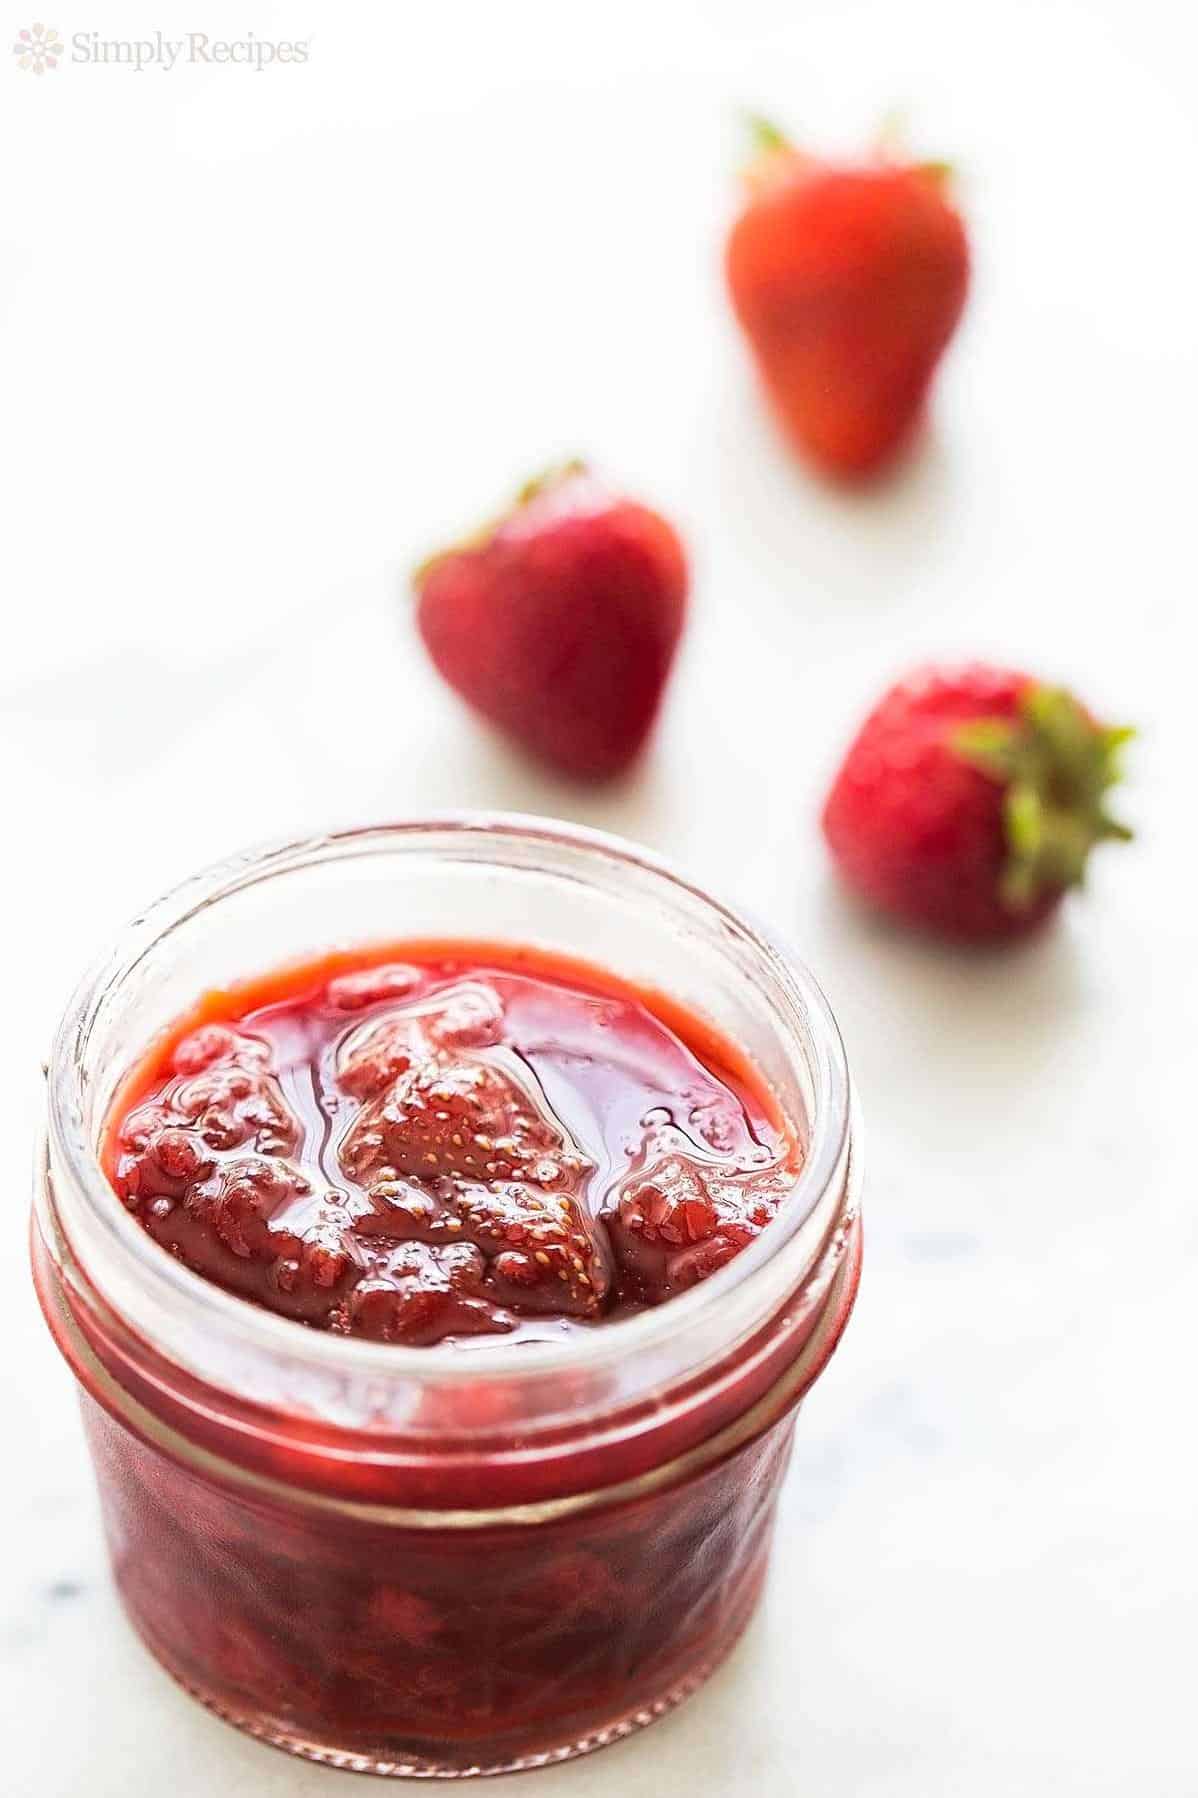  Get ready to spread some love with this delicious strawberry jam recipe.